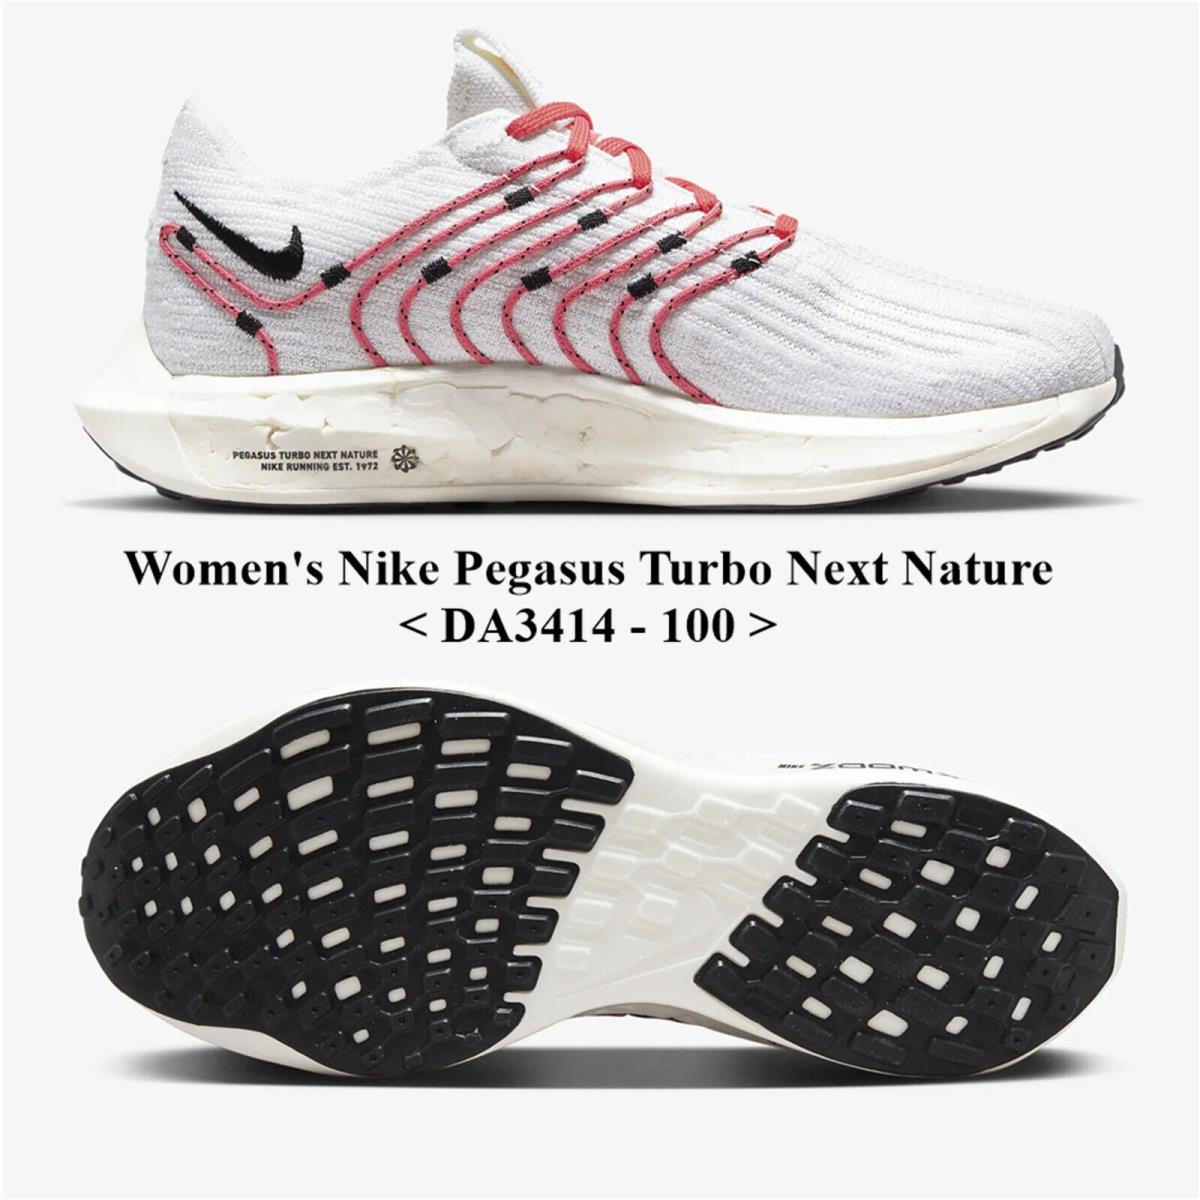 Nike Women`spegasus Turbo Next Nature DN3414-100 Running/casual Shoes NO Lid - White/Sea Coral/Black/Topaz Gold